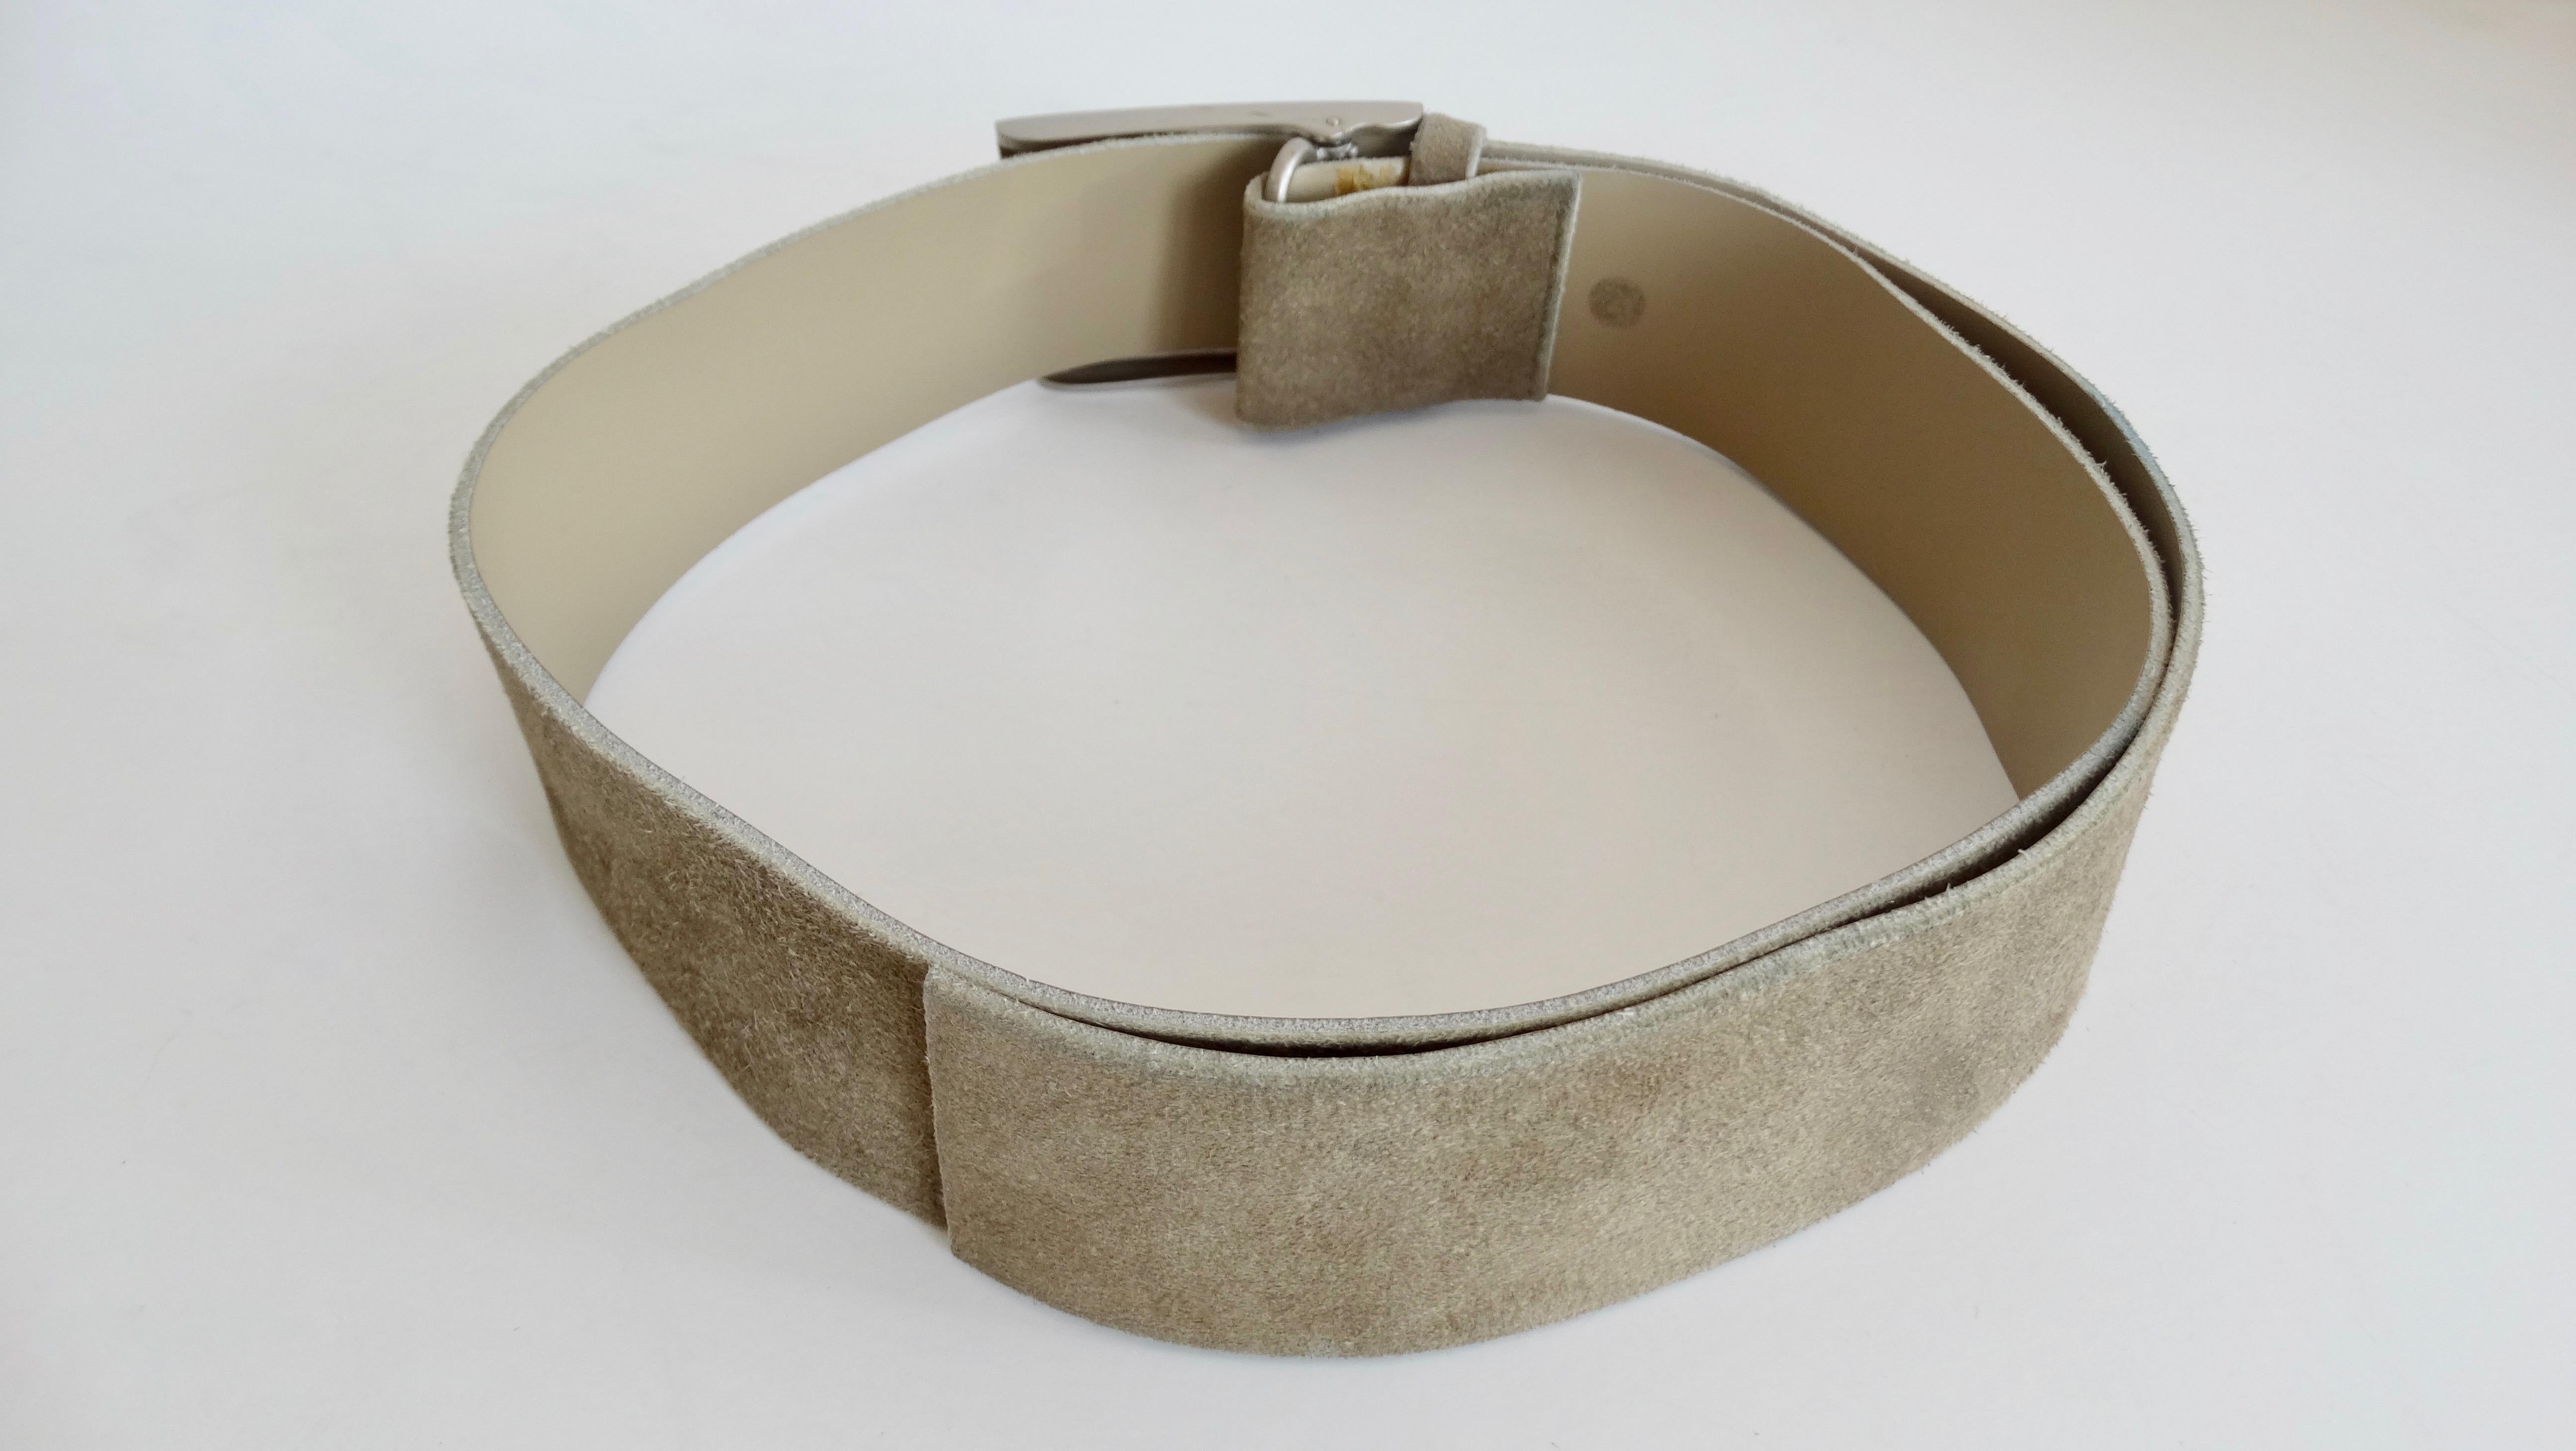 Everyone needs a belt that can go with nearly every thing! Circa early 2000s, this Chanel belt is made of sage colored suede and features a metal buckle stamped 